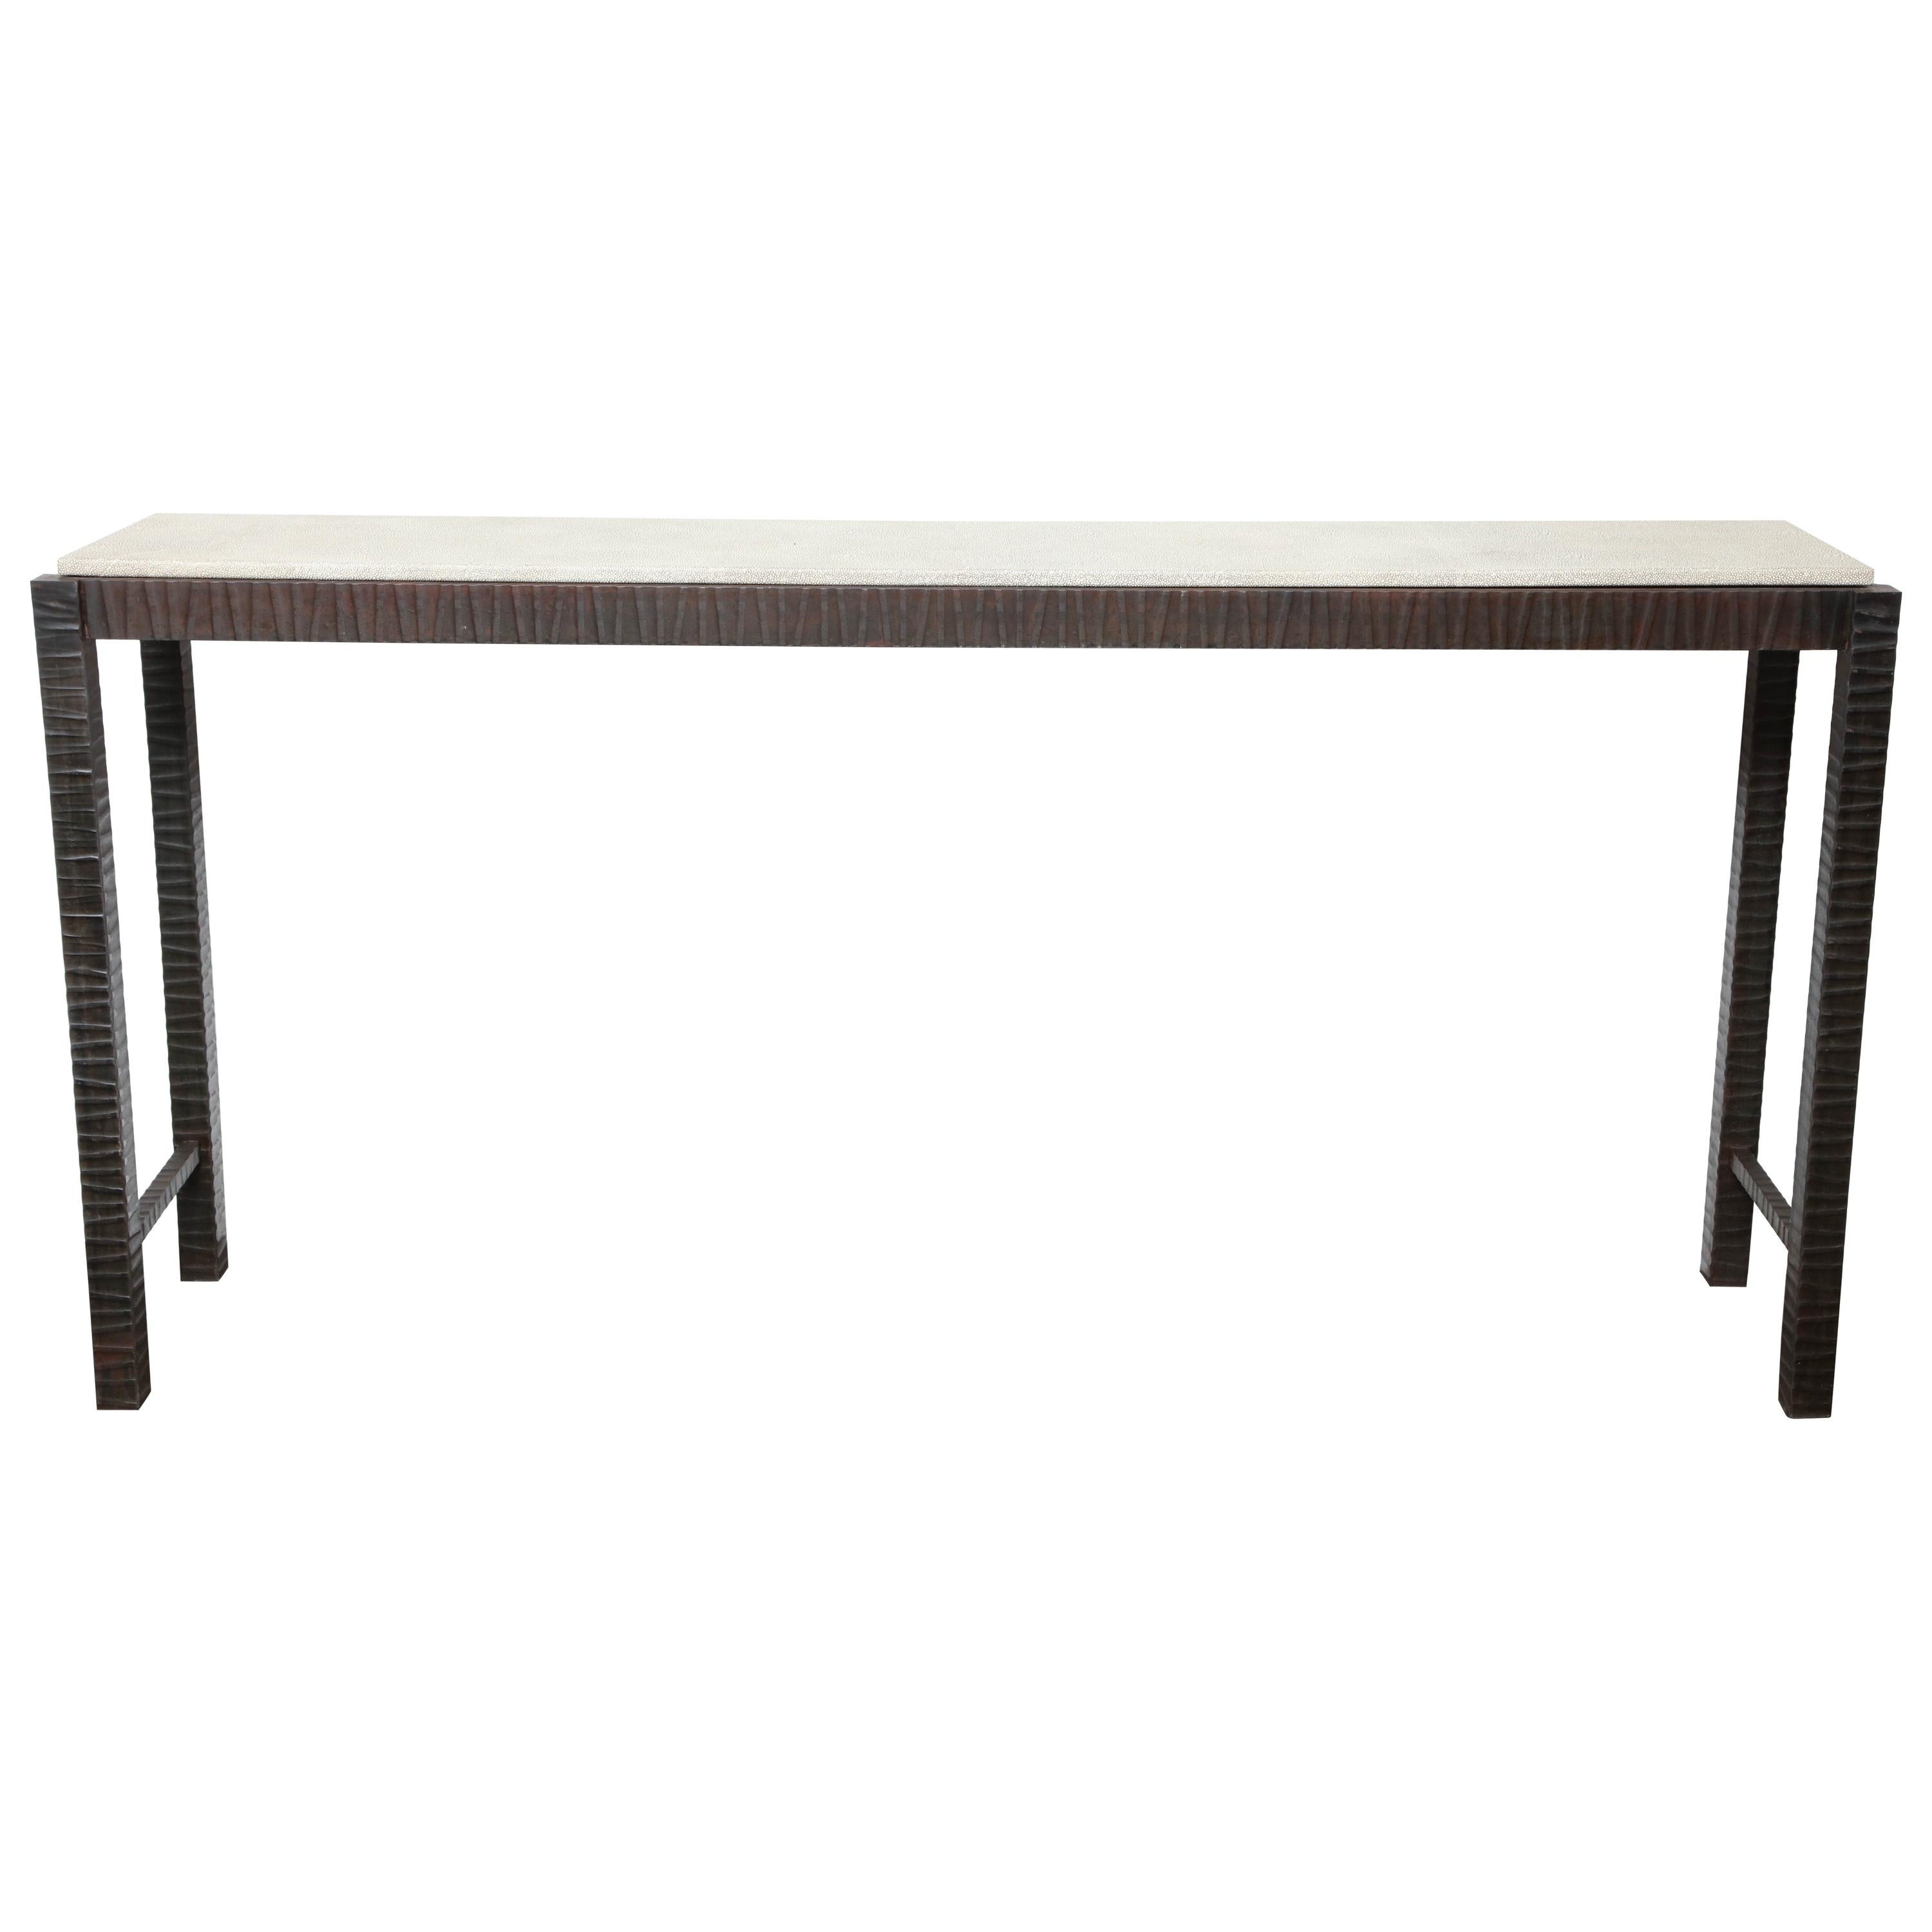 Shagreen Embossed Edelman Leather Console For Sale